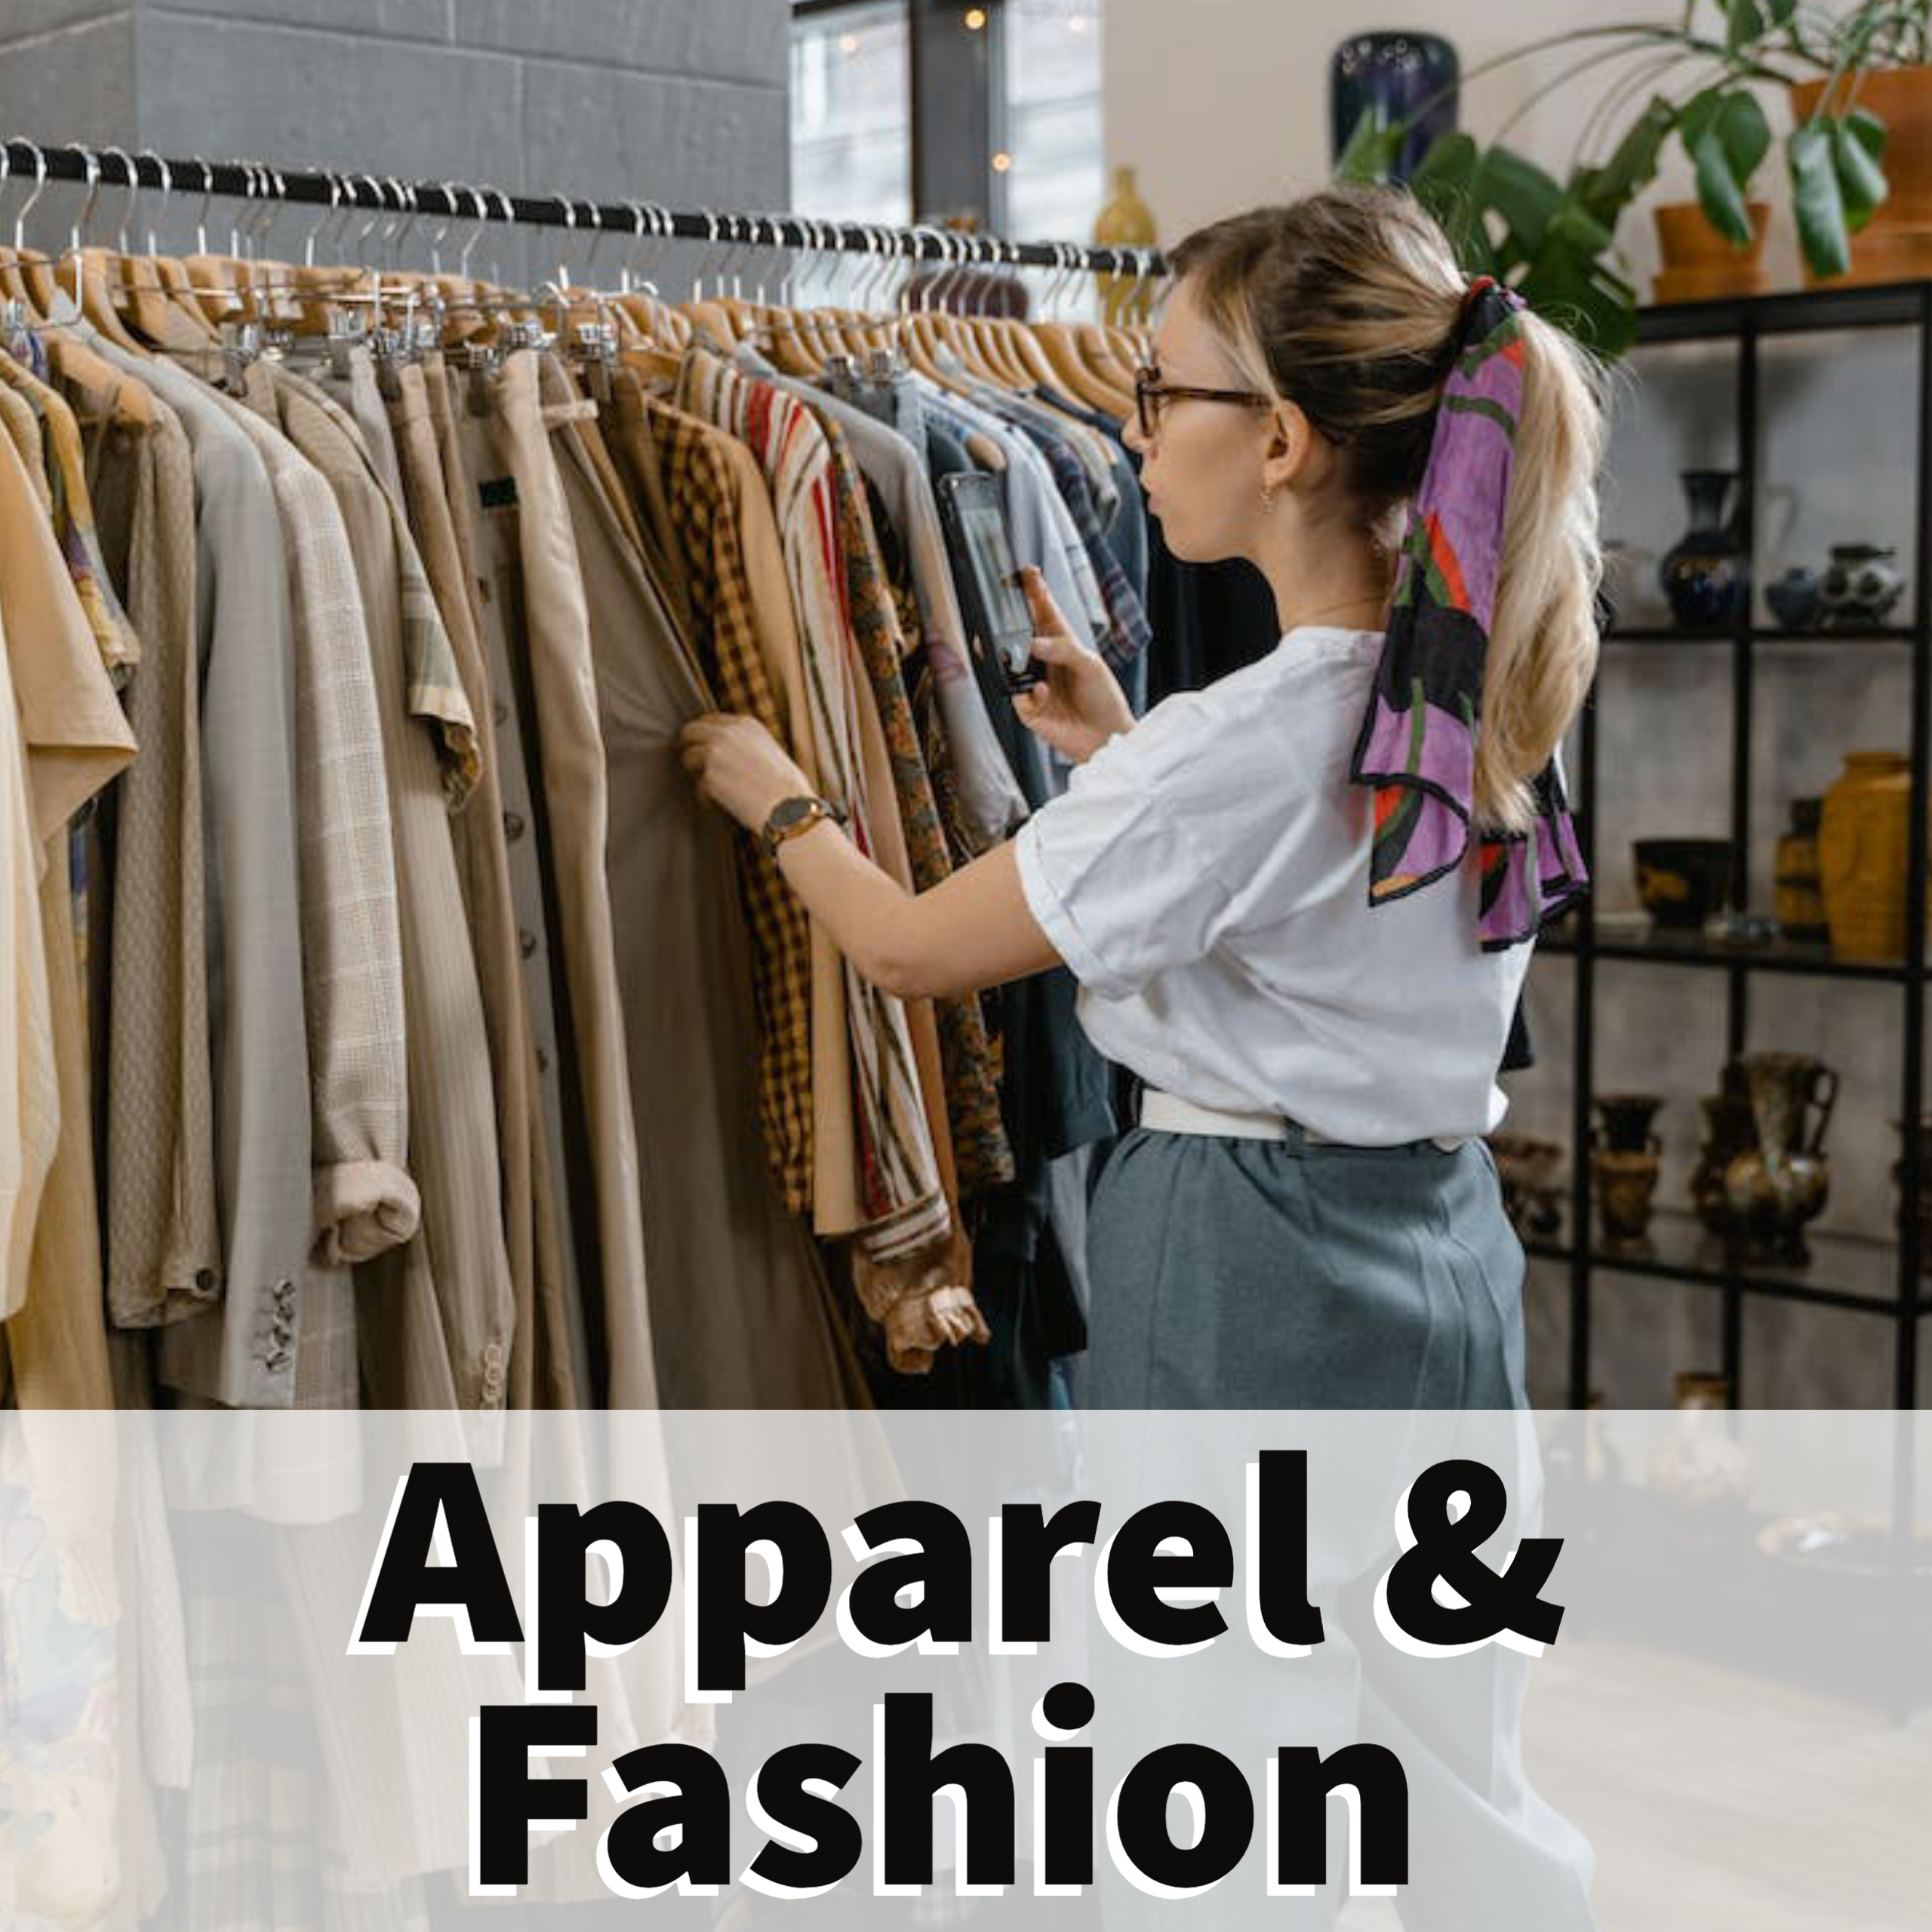 Apparel and Fashion Retail Stores